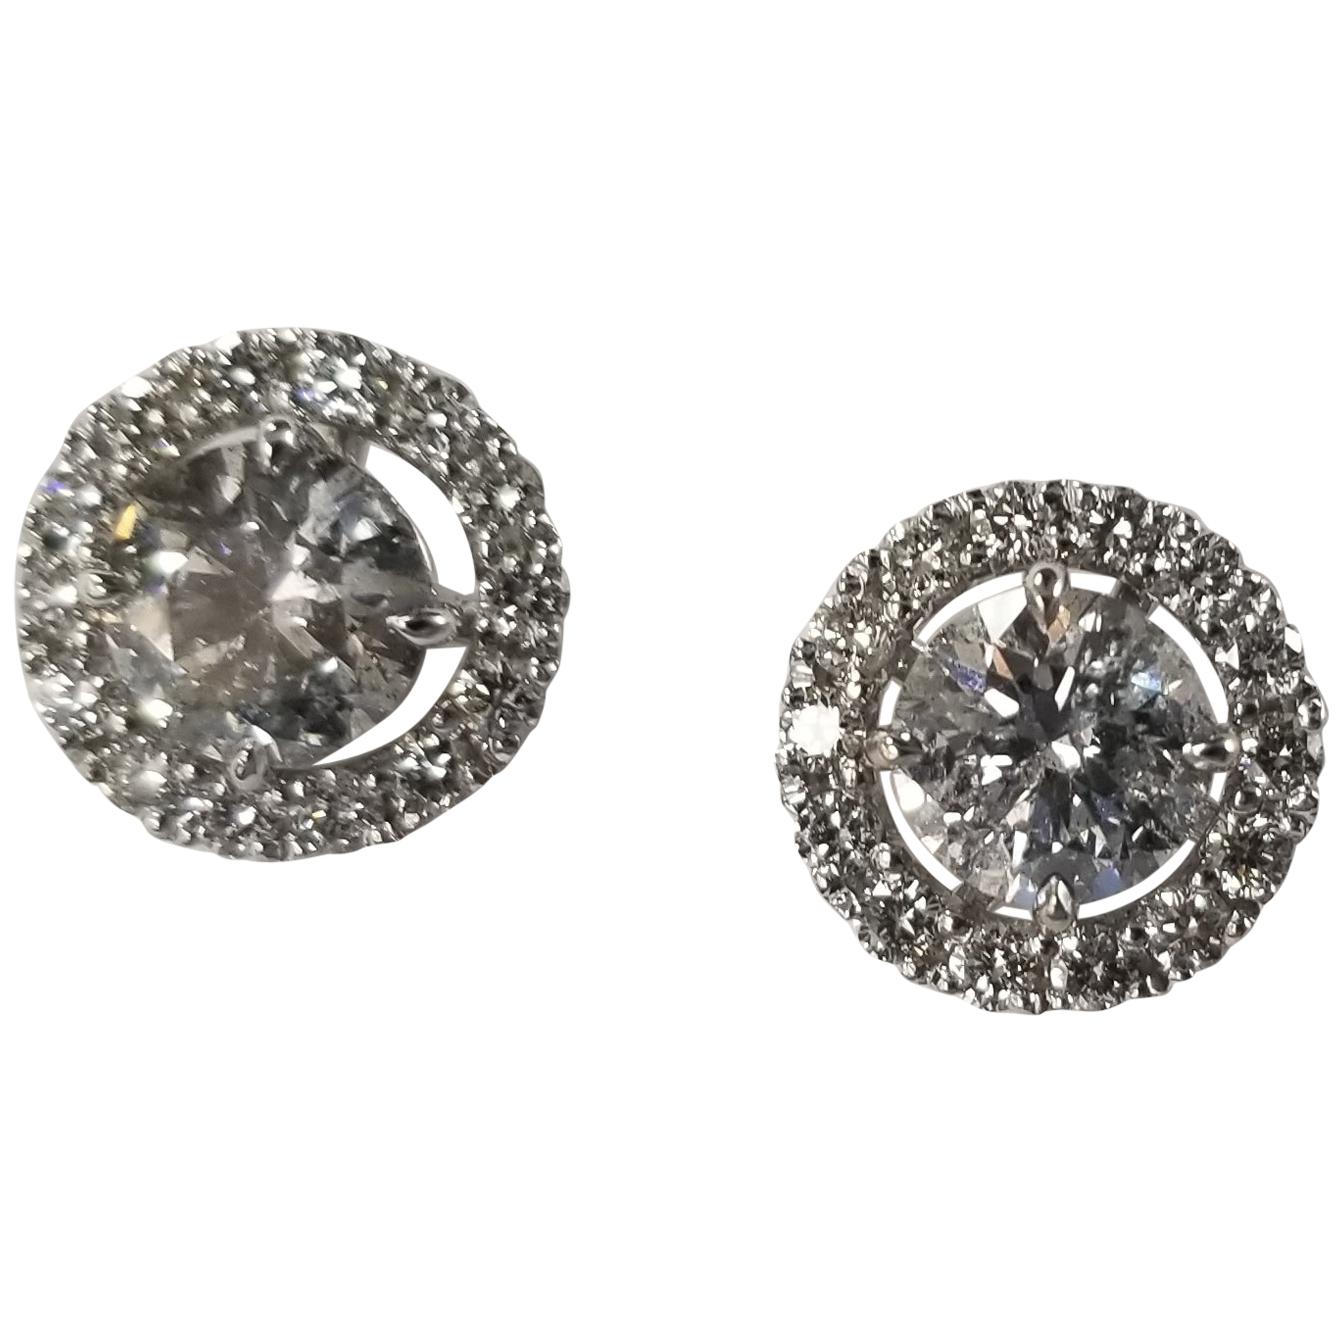 14k Gold Diamond Stud Earrings with Diamond Halo-Jackets Total Weight 2.71 Carat For Sale